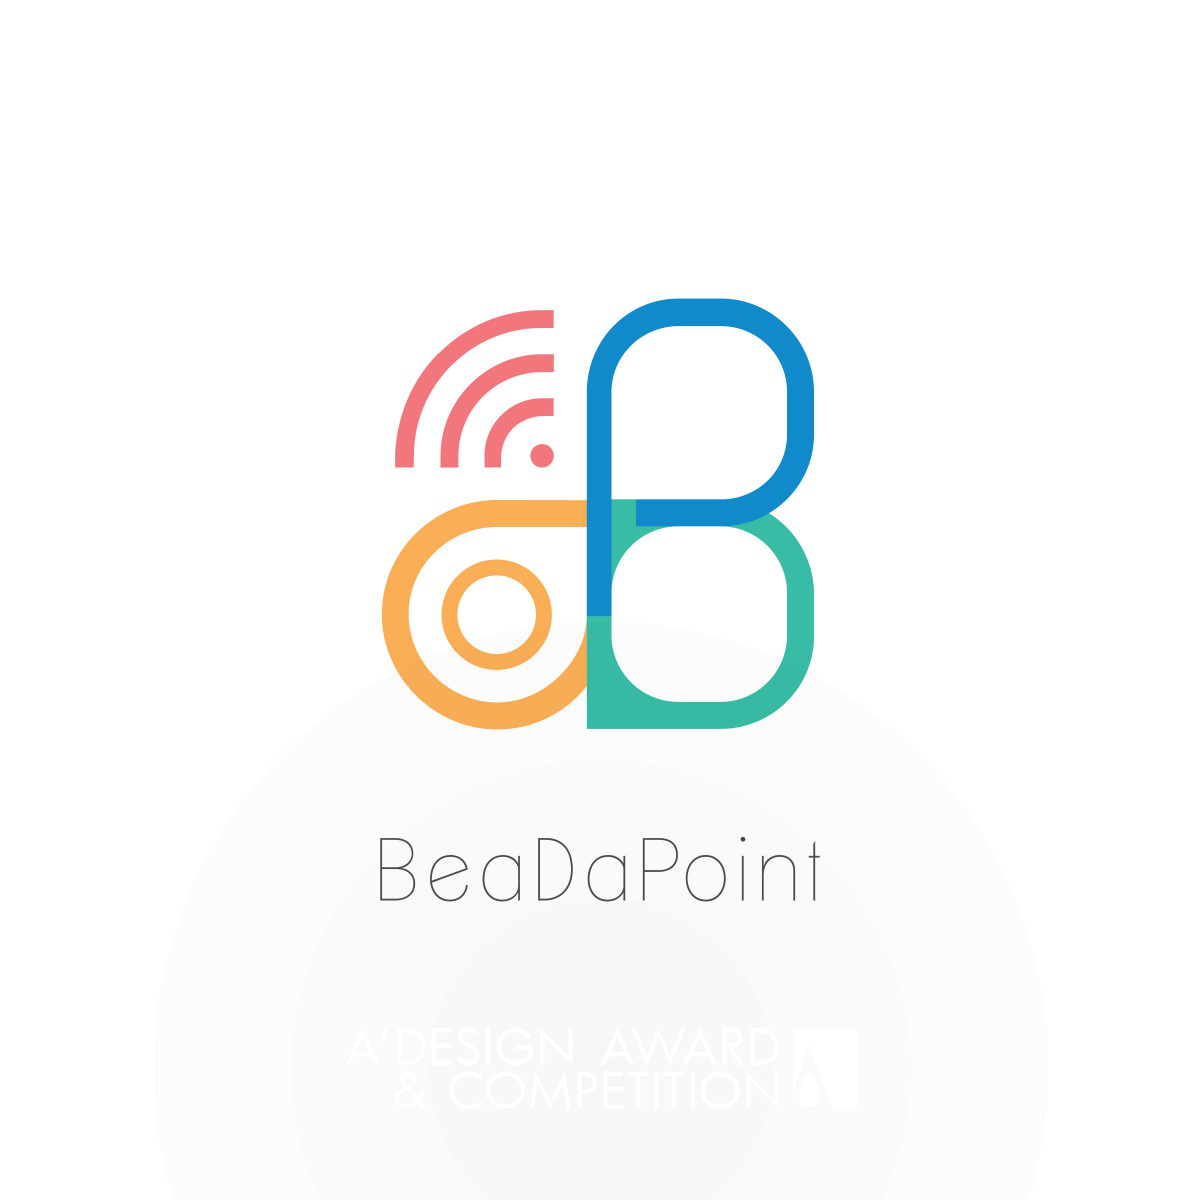 Bea Da Point Multifunctional Mobile Application by Vision Desire Ltd.